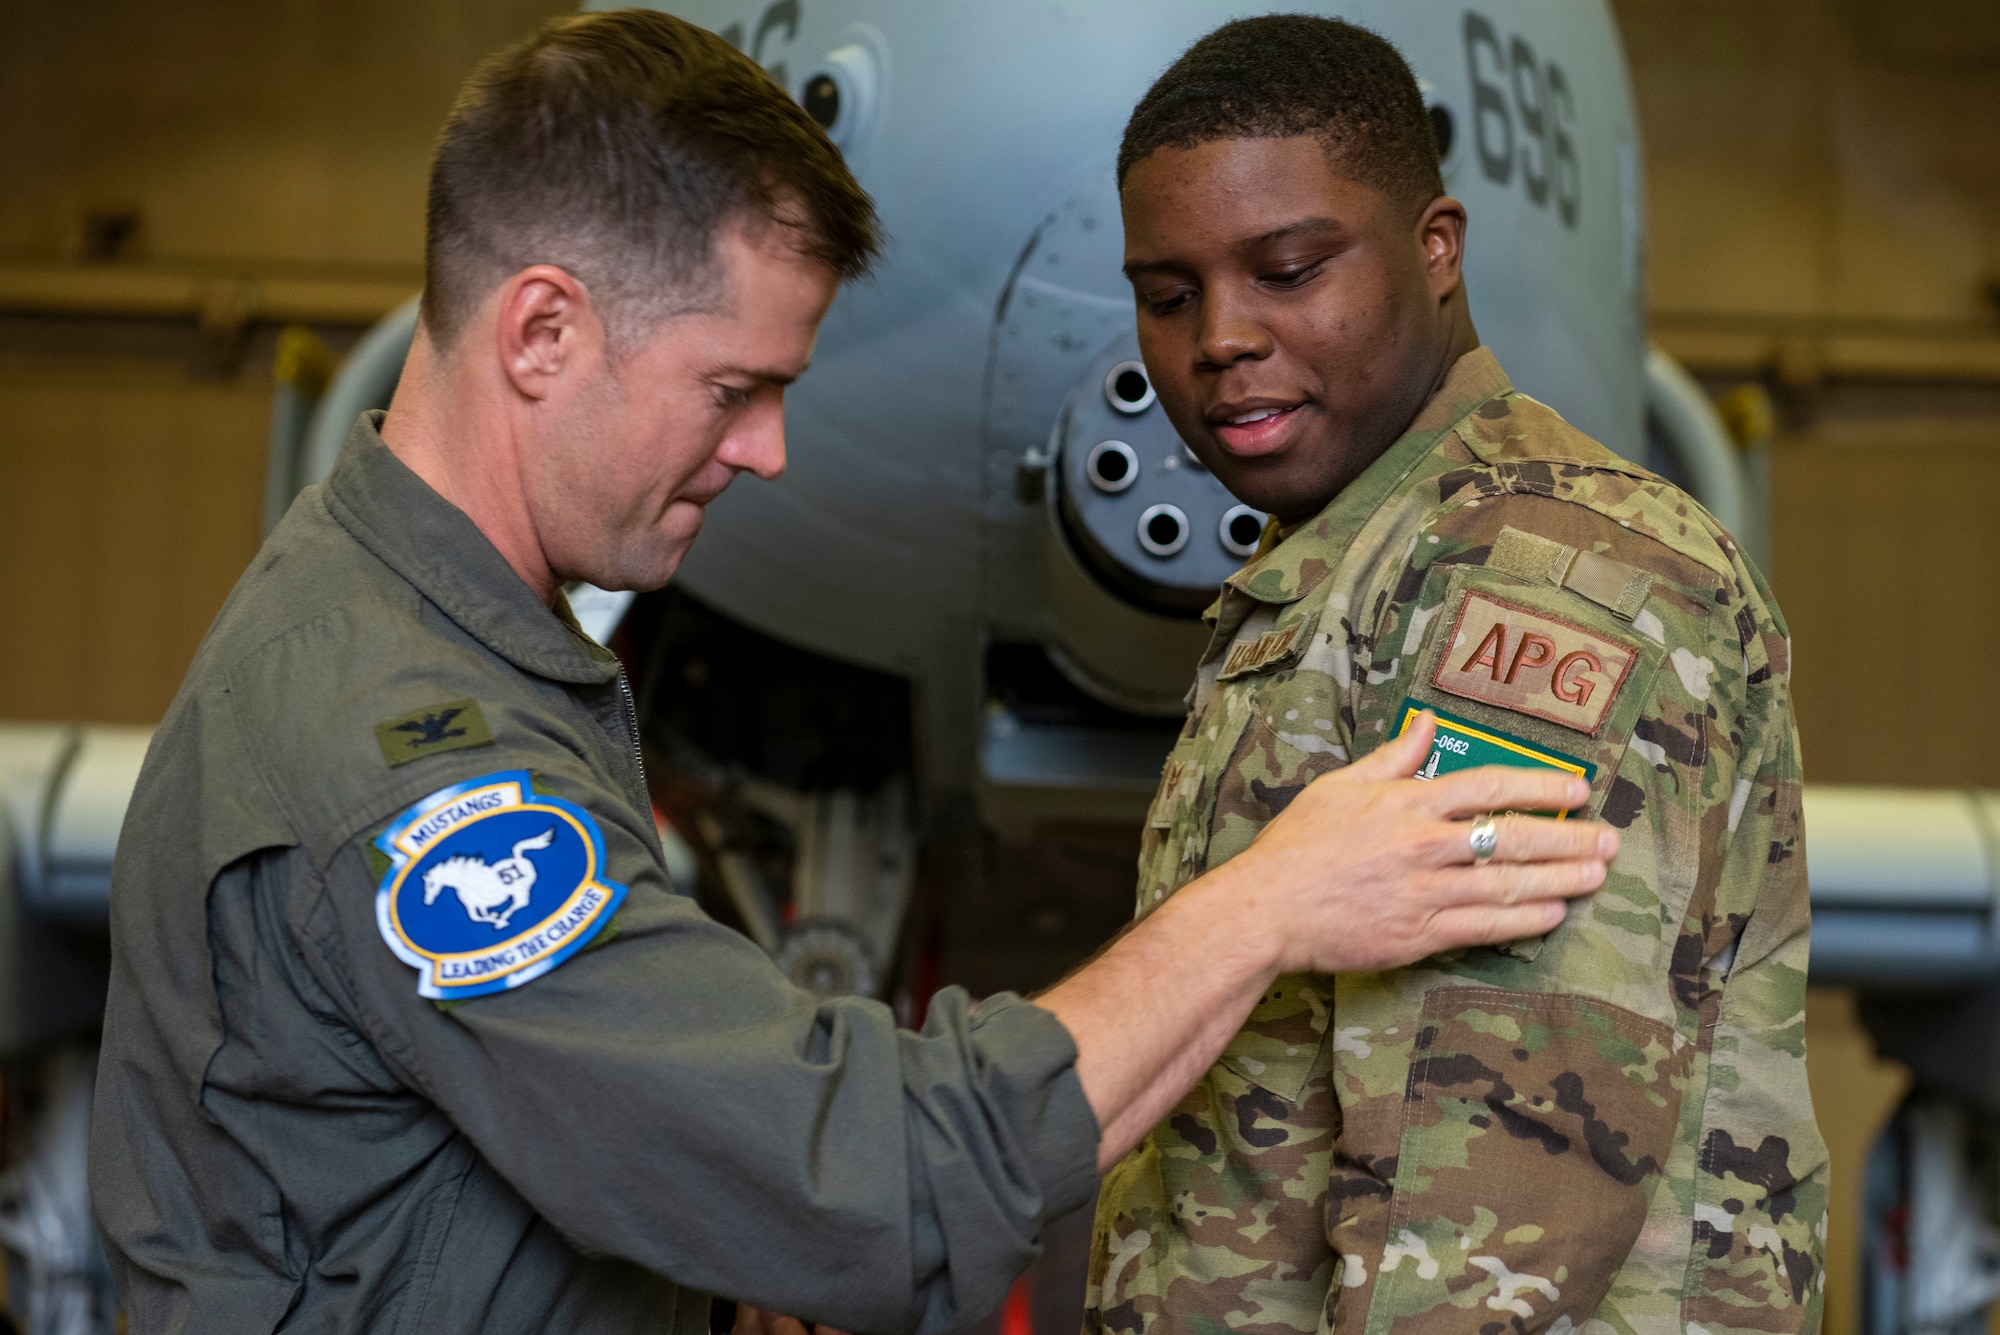 Col. Joshua “Dog” Wood, 51st Fighter Wing commander, applies a dedicated crew chief patch to Staff Sgt. Alijah Smith, 51st Aircraft Maintenance Squadron dedicated crew chief